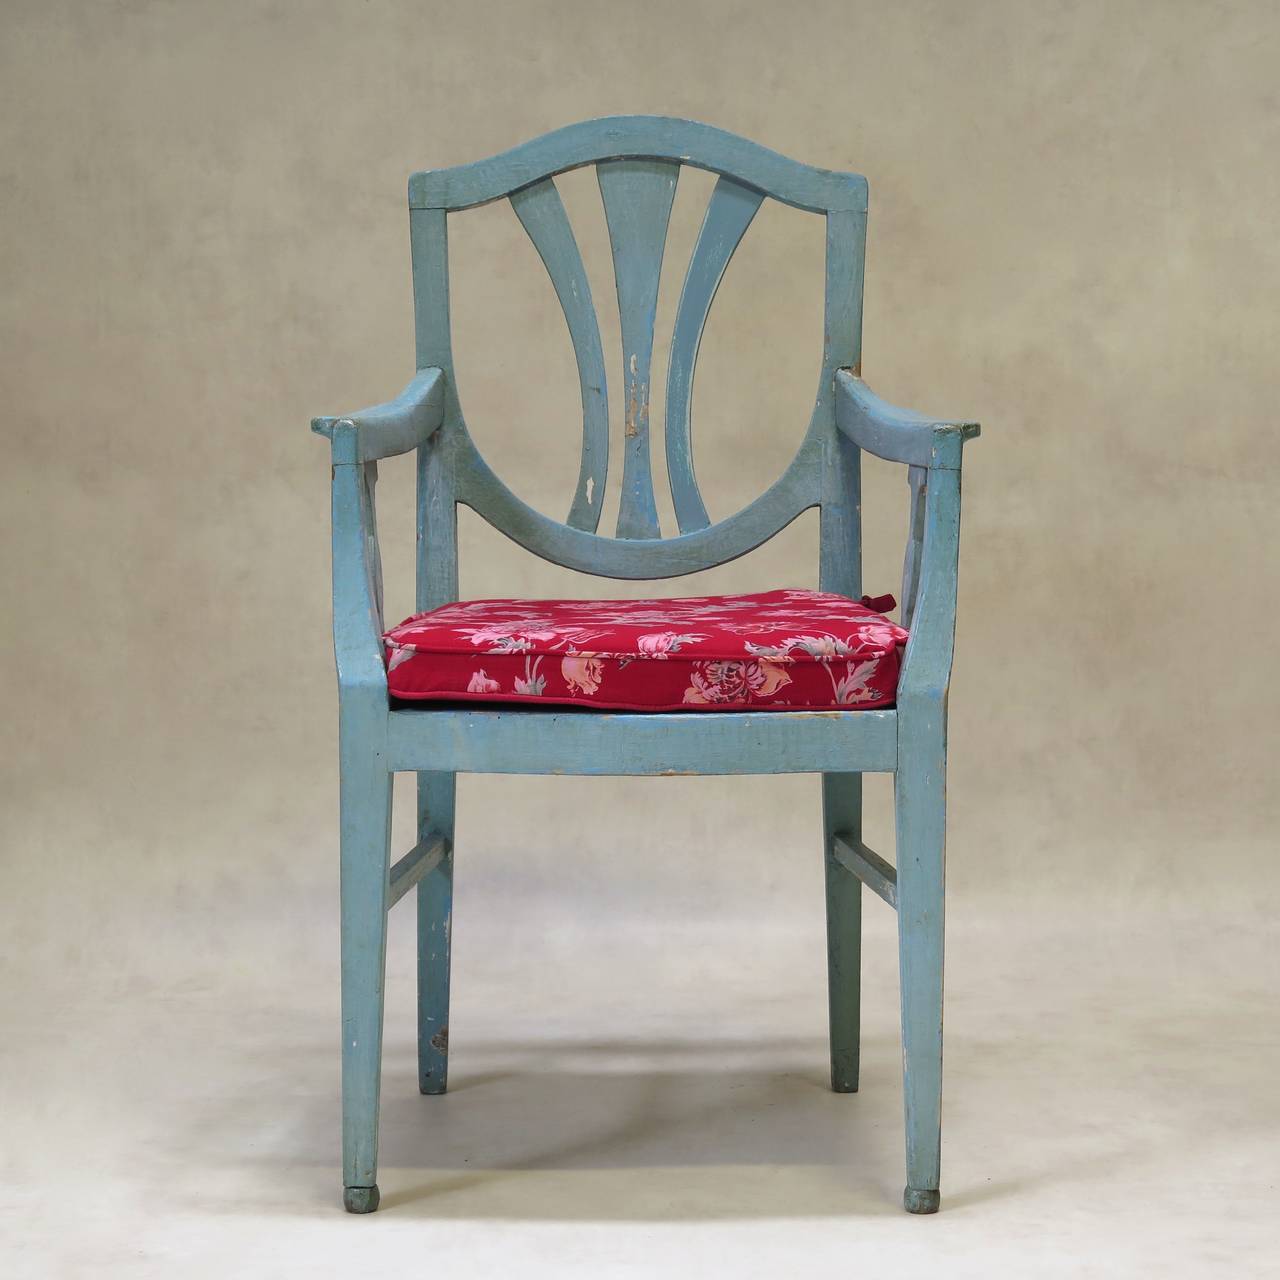 Charming set of two chairs and two armchairs with shield-shape backs, painted robin's egg blue. The front legs end in ball feet. The seat cushions are covered in lovely printed cotton, with a floral pattern on a red background.

Dimensions